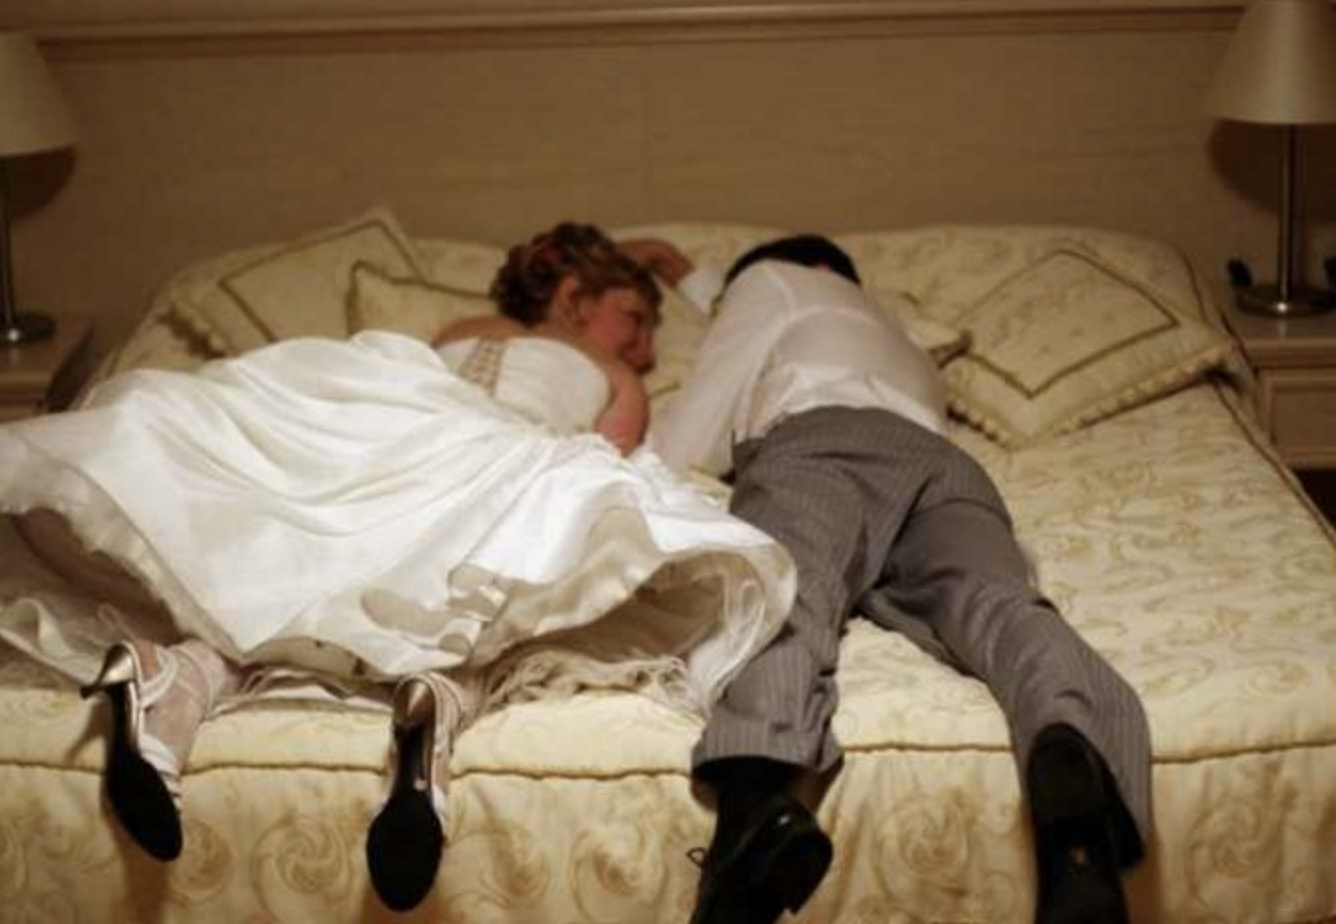 Newly-wed couple lying on a bed | Source: Shutterstock